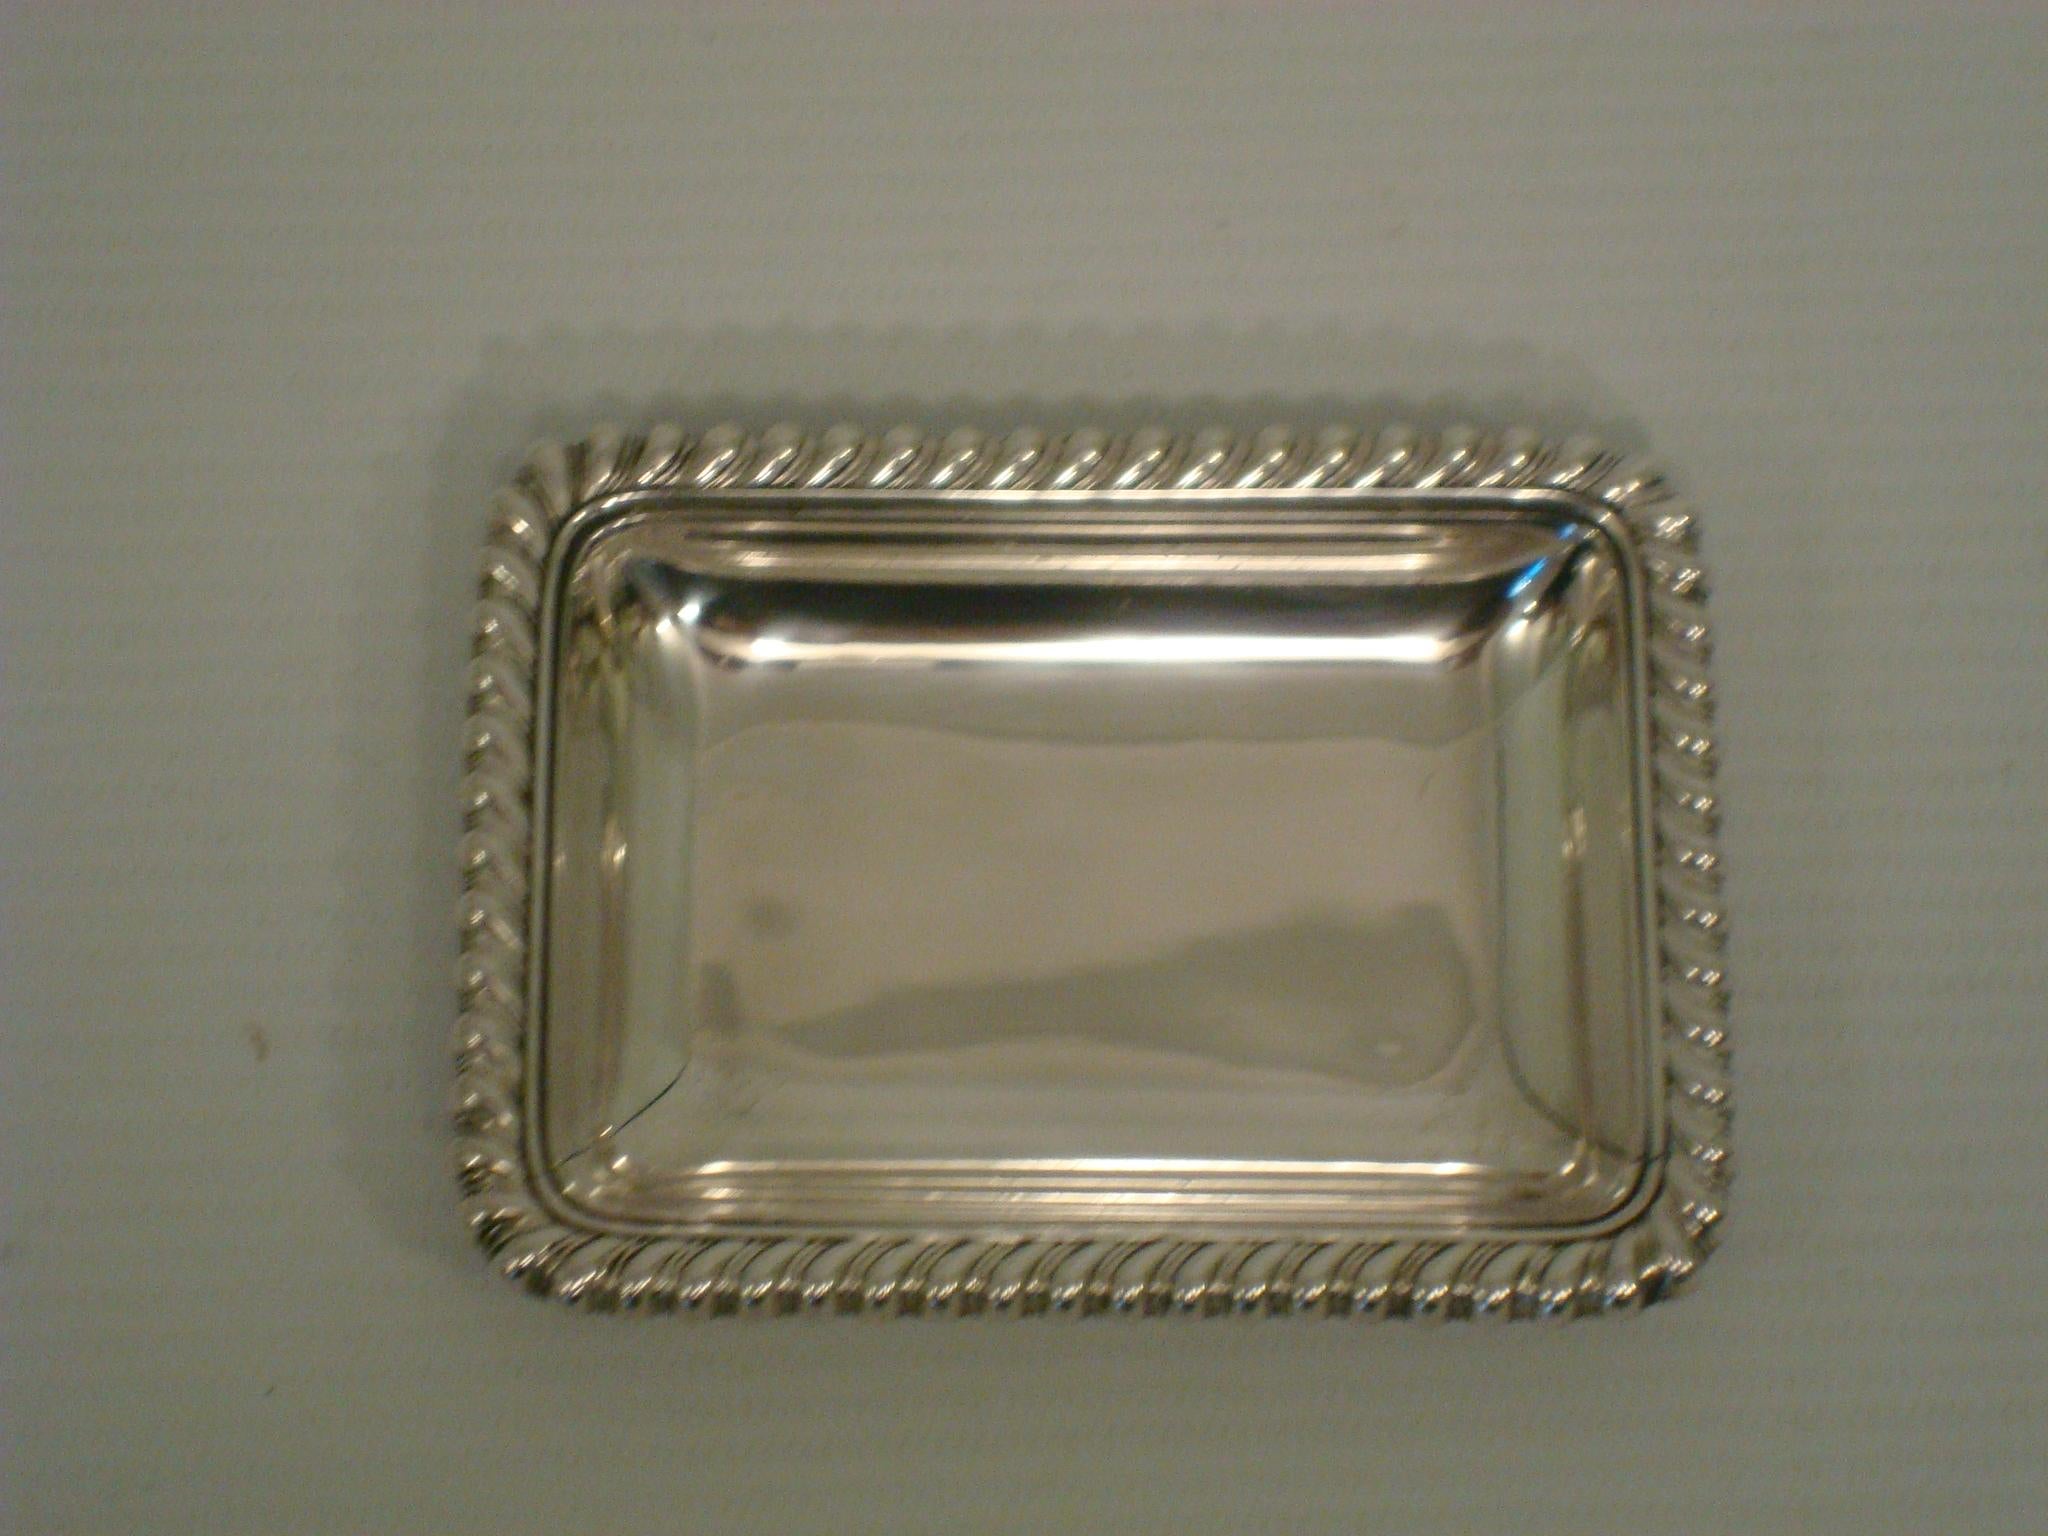 Rare to see Cartier small tray. Very chic
Cartier Jewelry Dish or a Personal Cards / Keys / Trinket Tray / Coins Plate
This piece is a handsome Tray. Can be use as a jewelry dish or a personal desk cards plate. Perfect size. Trinket Tray / Vide de